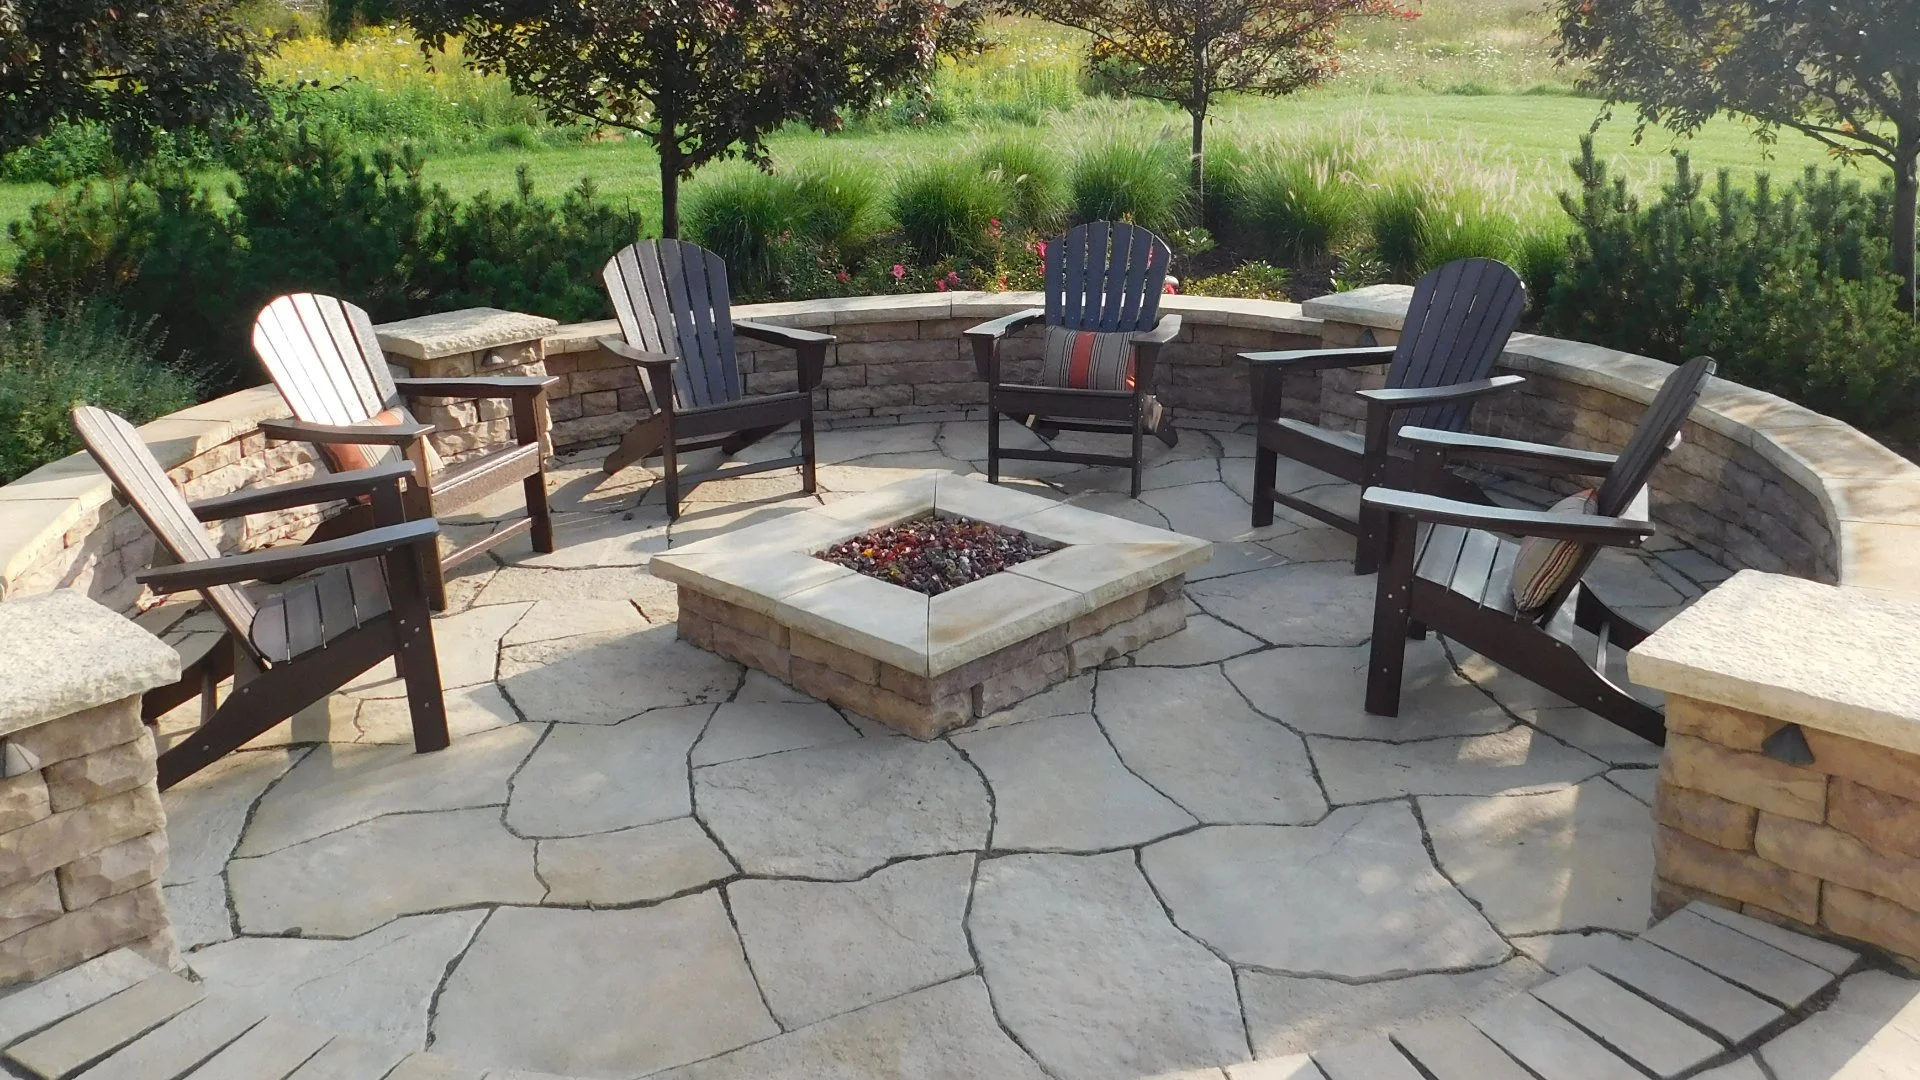 Don’t Think Twice About Adding a Fire Pit to Your Property - Here’s Why!